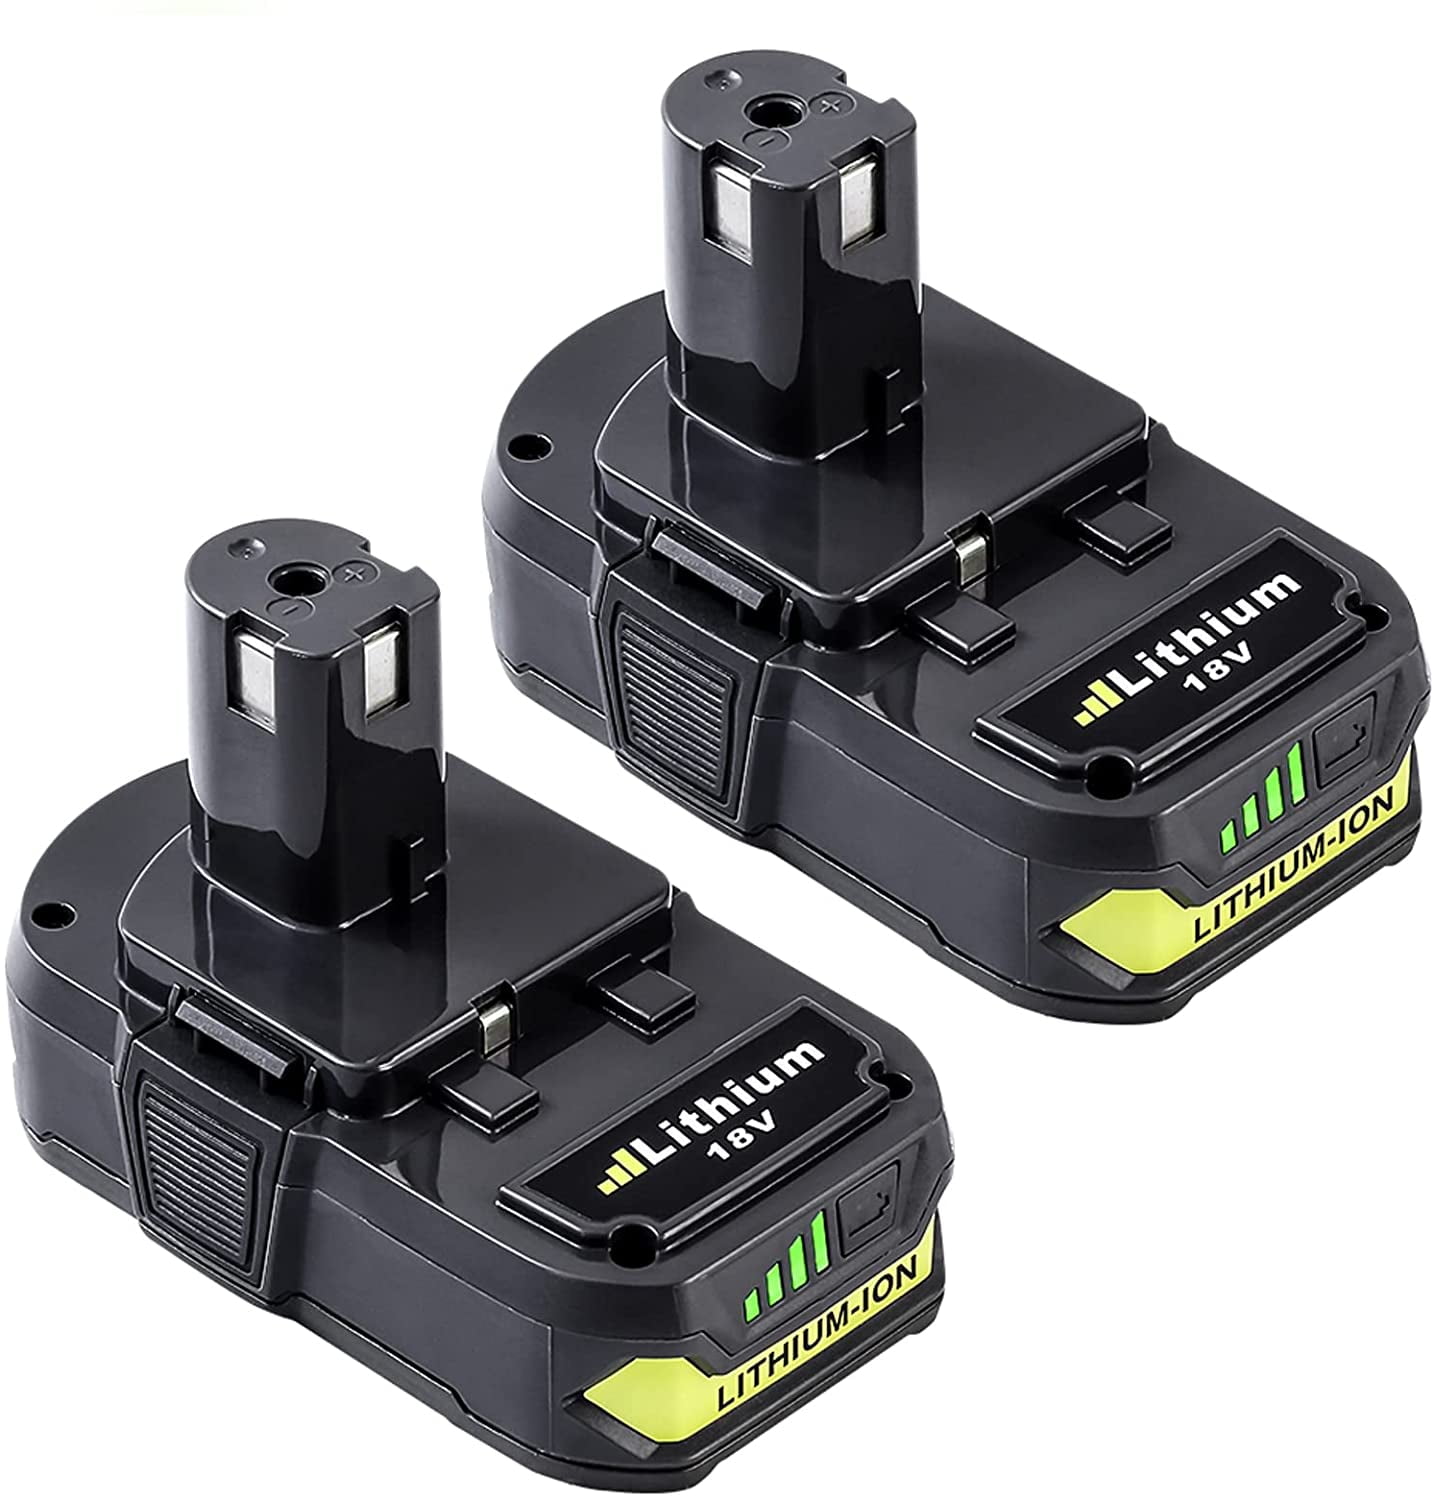 2-Pack Ryobi 18V Battery Replacement - Compatible with Ryobi P100, P501,  P300, P3200, P230, P700, P600, P530, P510, P250, P221, P521, P200, P240